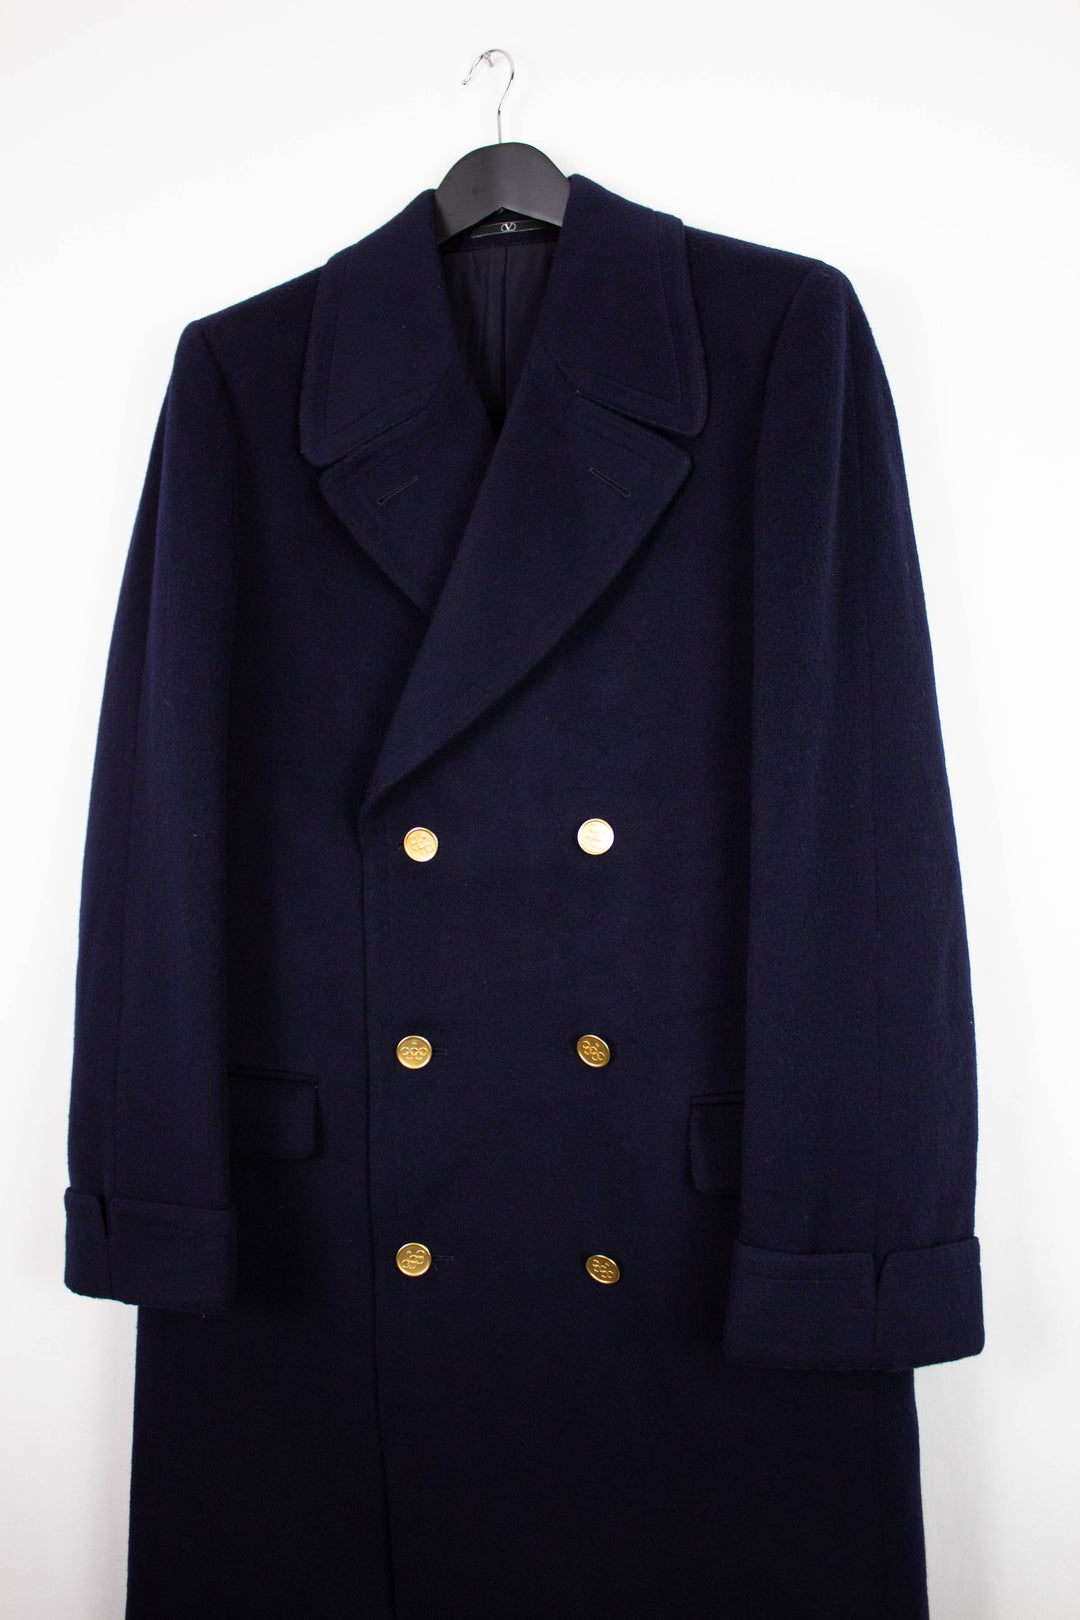 Valentino navy wool coat - Olympic Edition - 52 Large